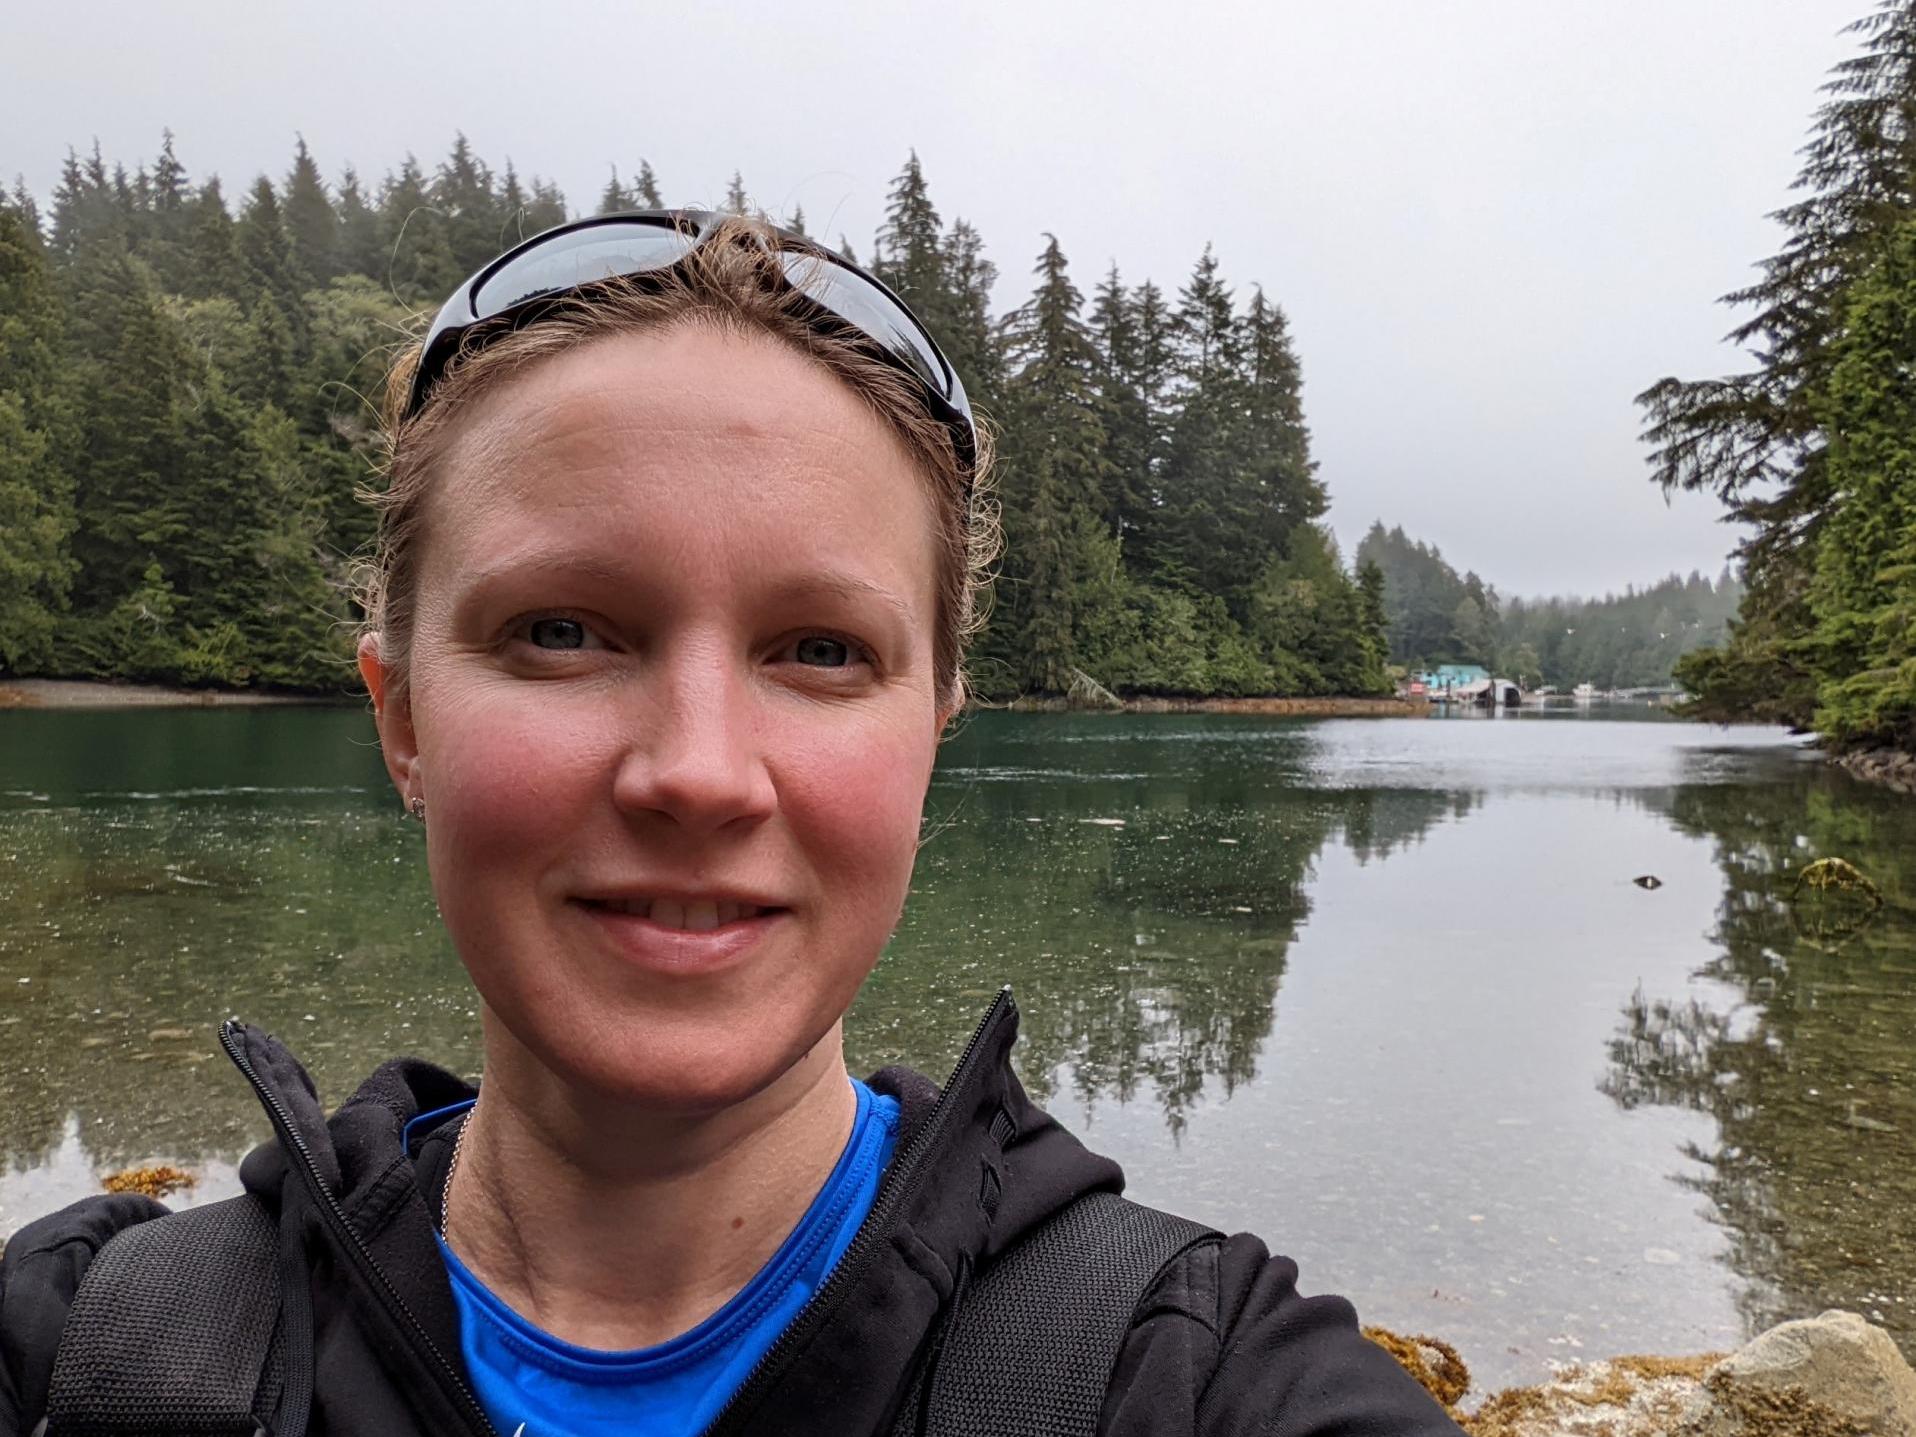 Professor Cosima Porteous in front of a lake view with reflected trees in water